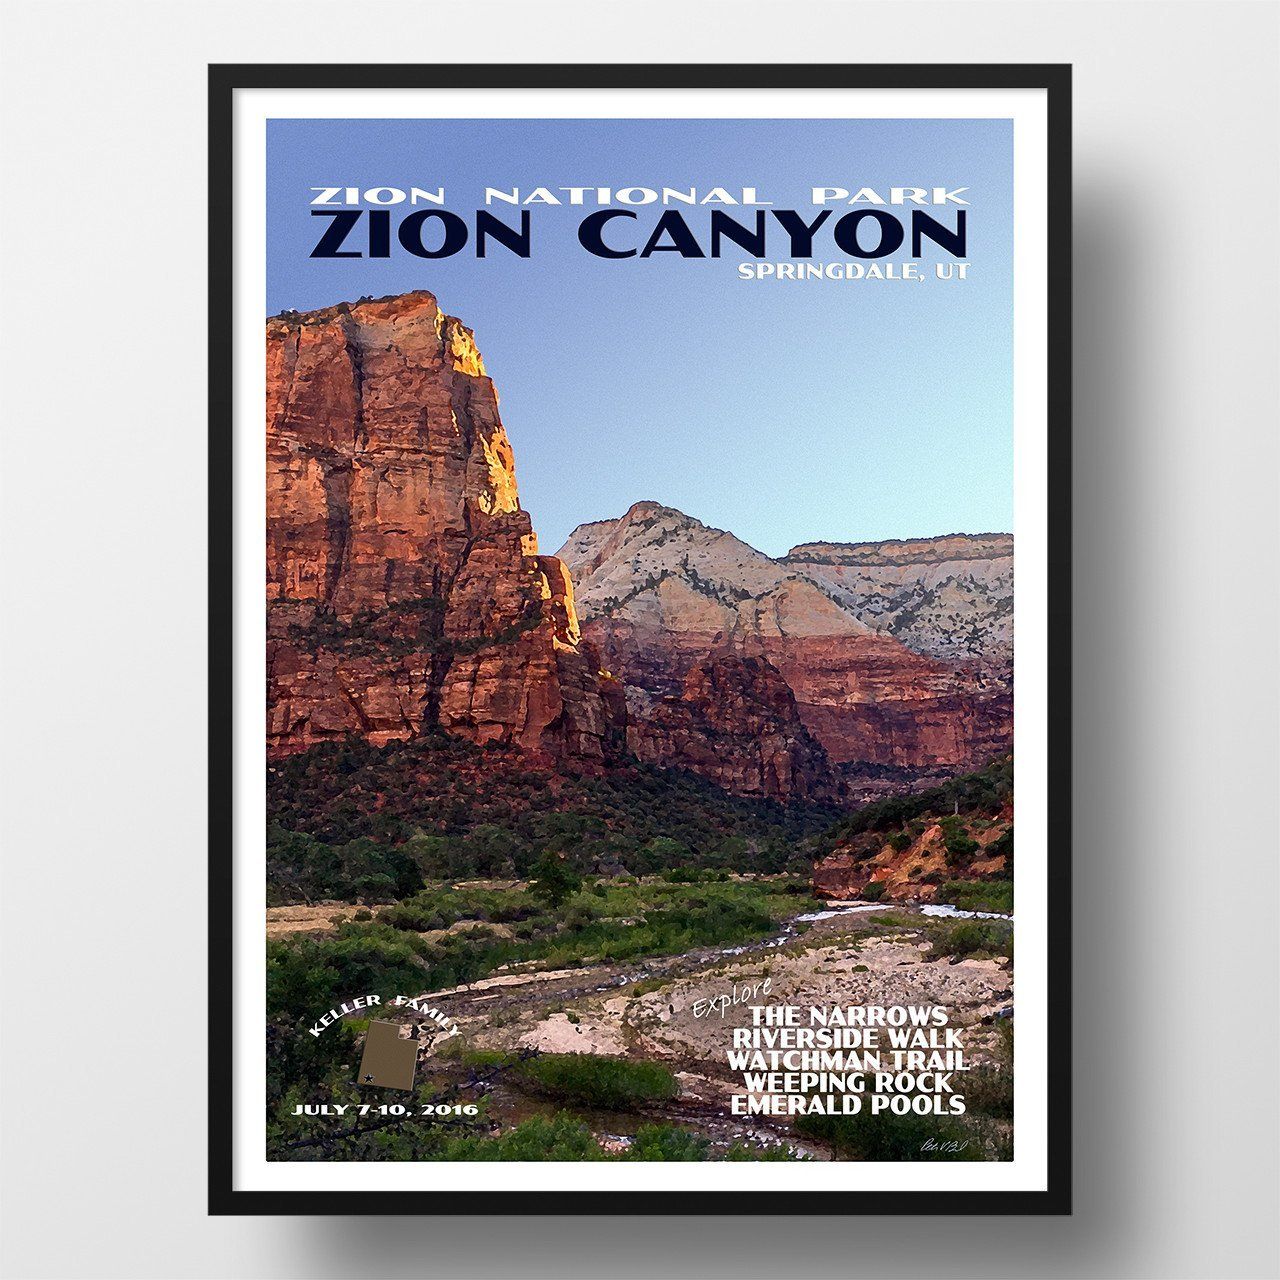 Zion National Park Poster-Zion Canyon (Personalized)